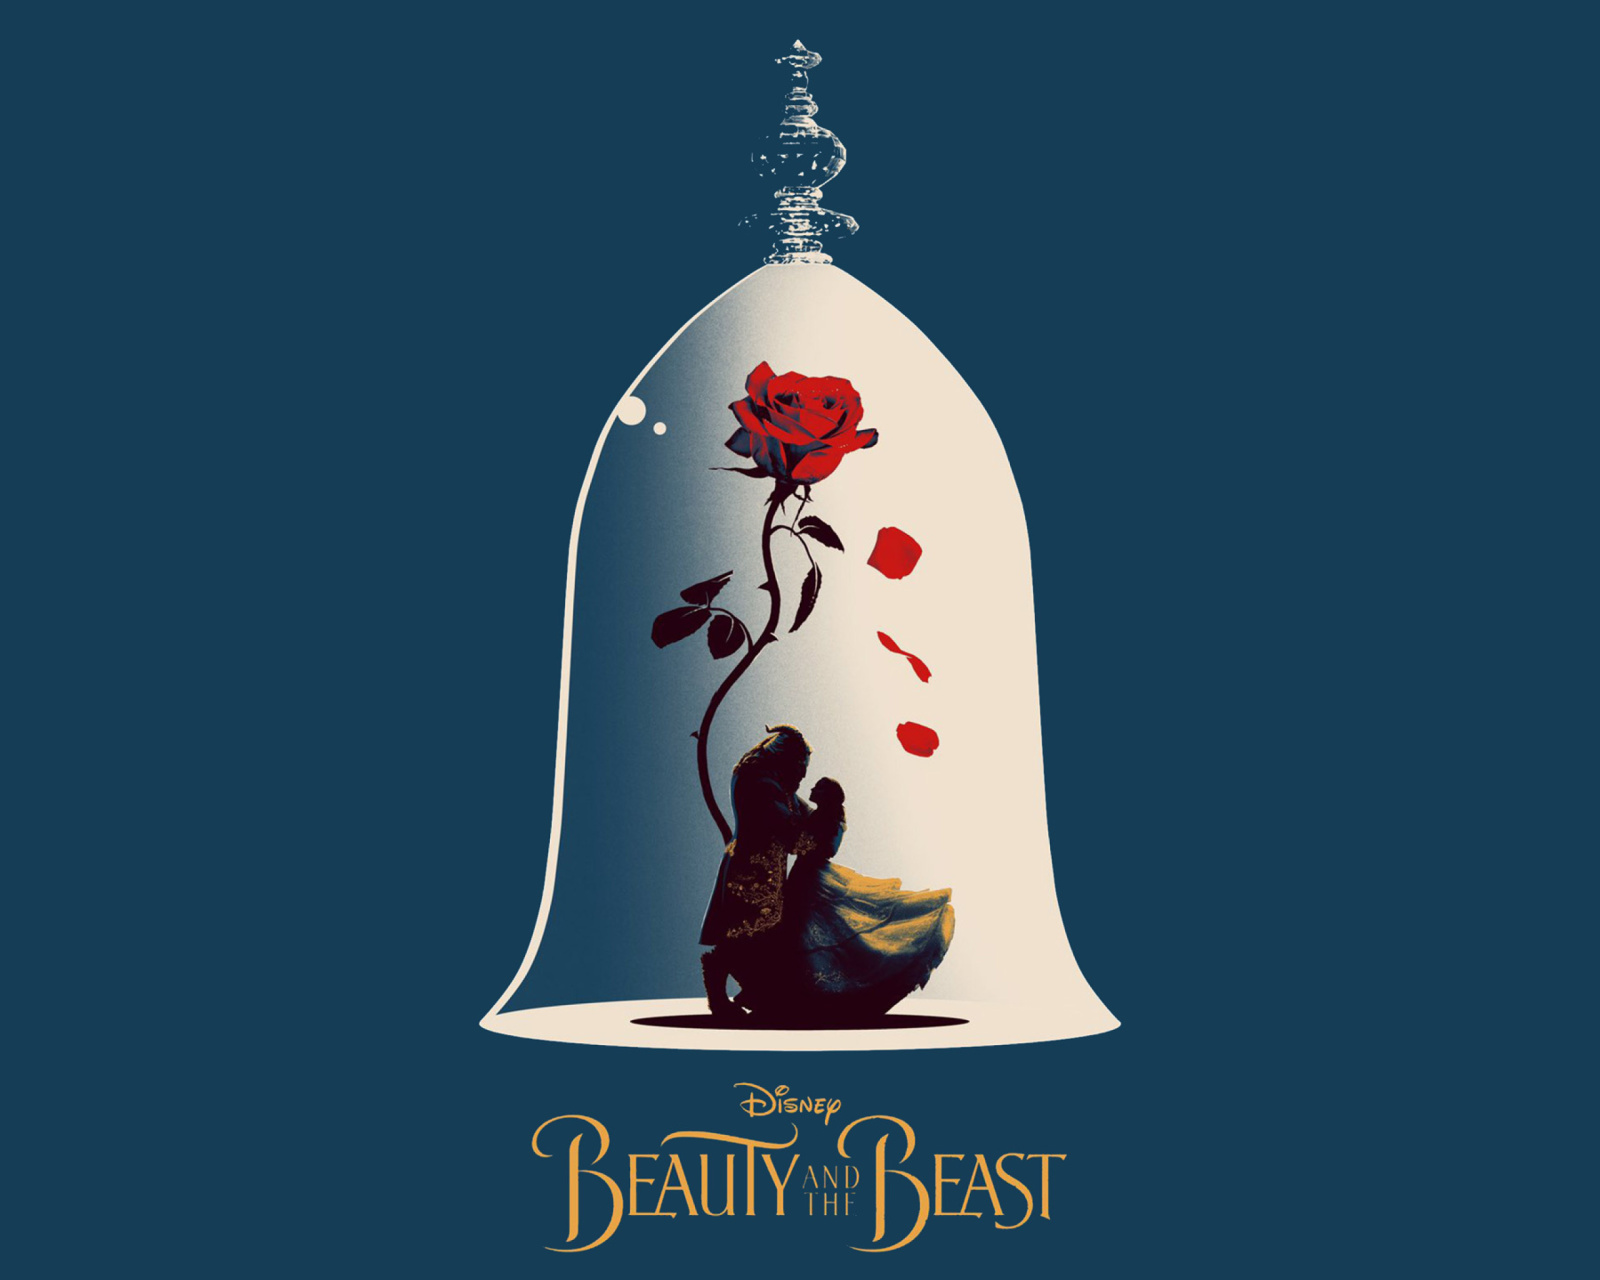 Das Beauty and the Beast Poster Wallpaper 1600x1280